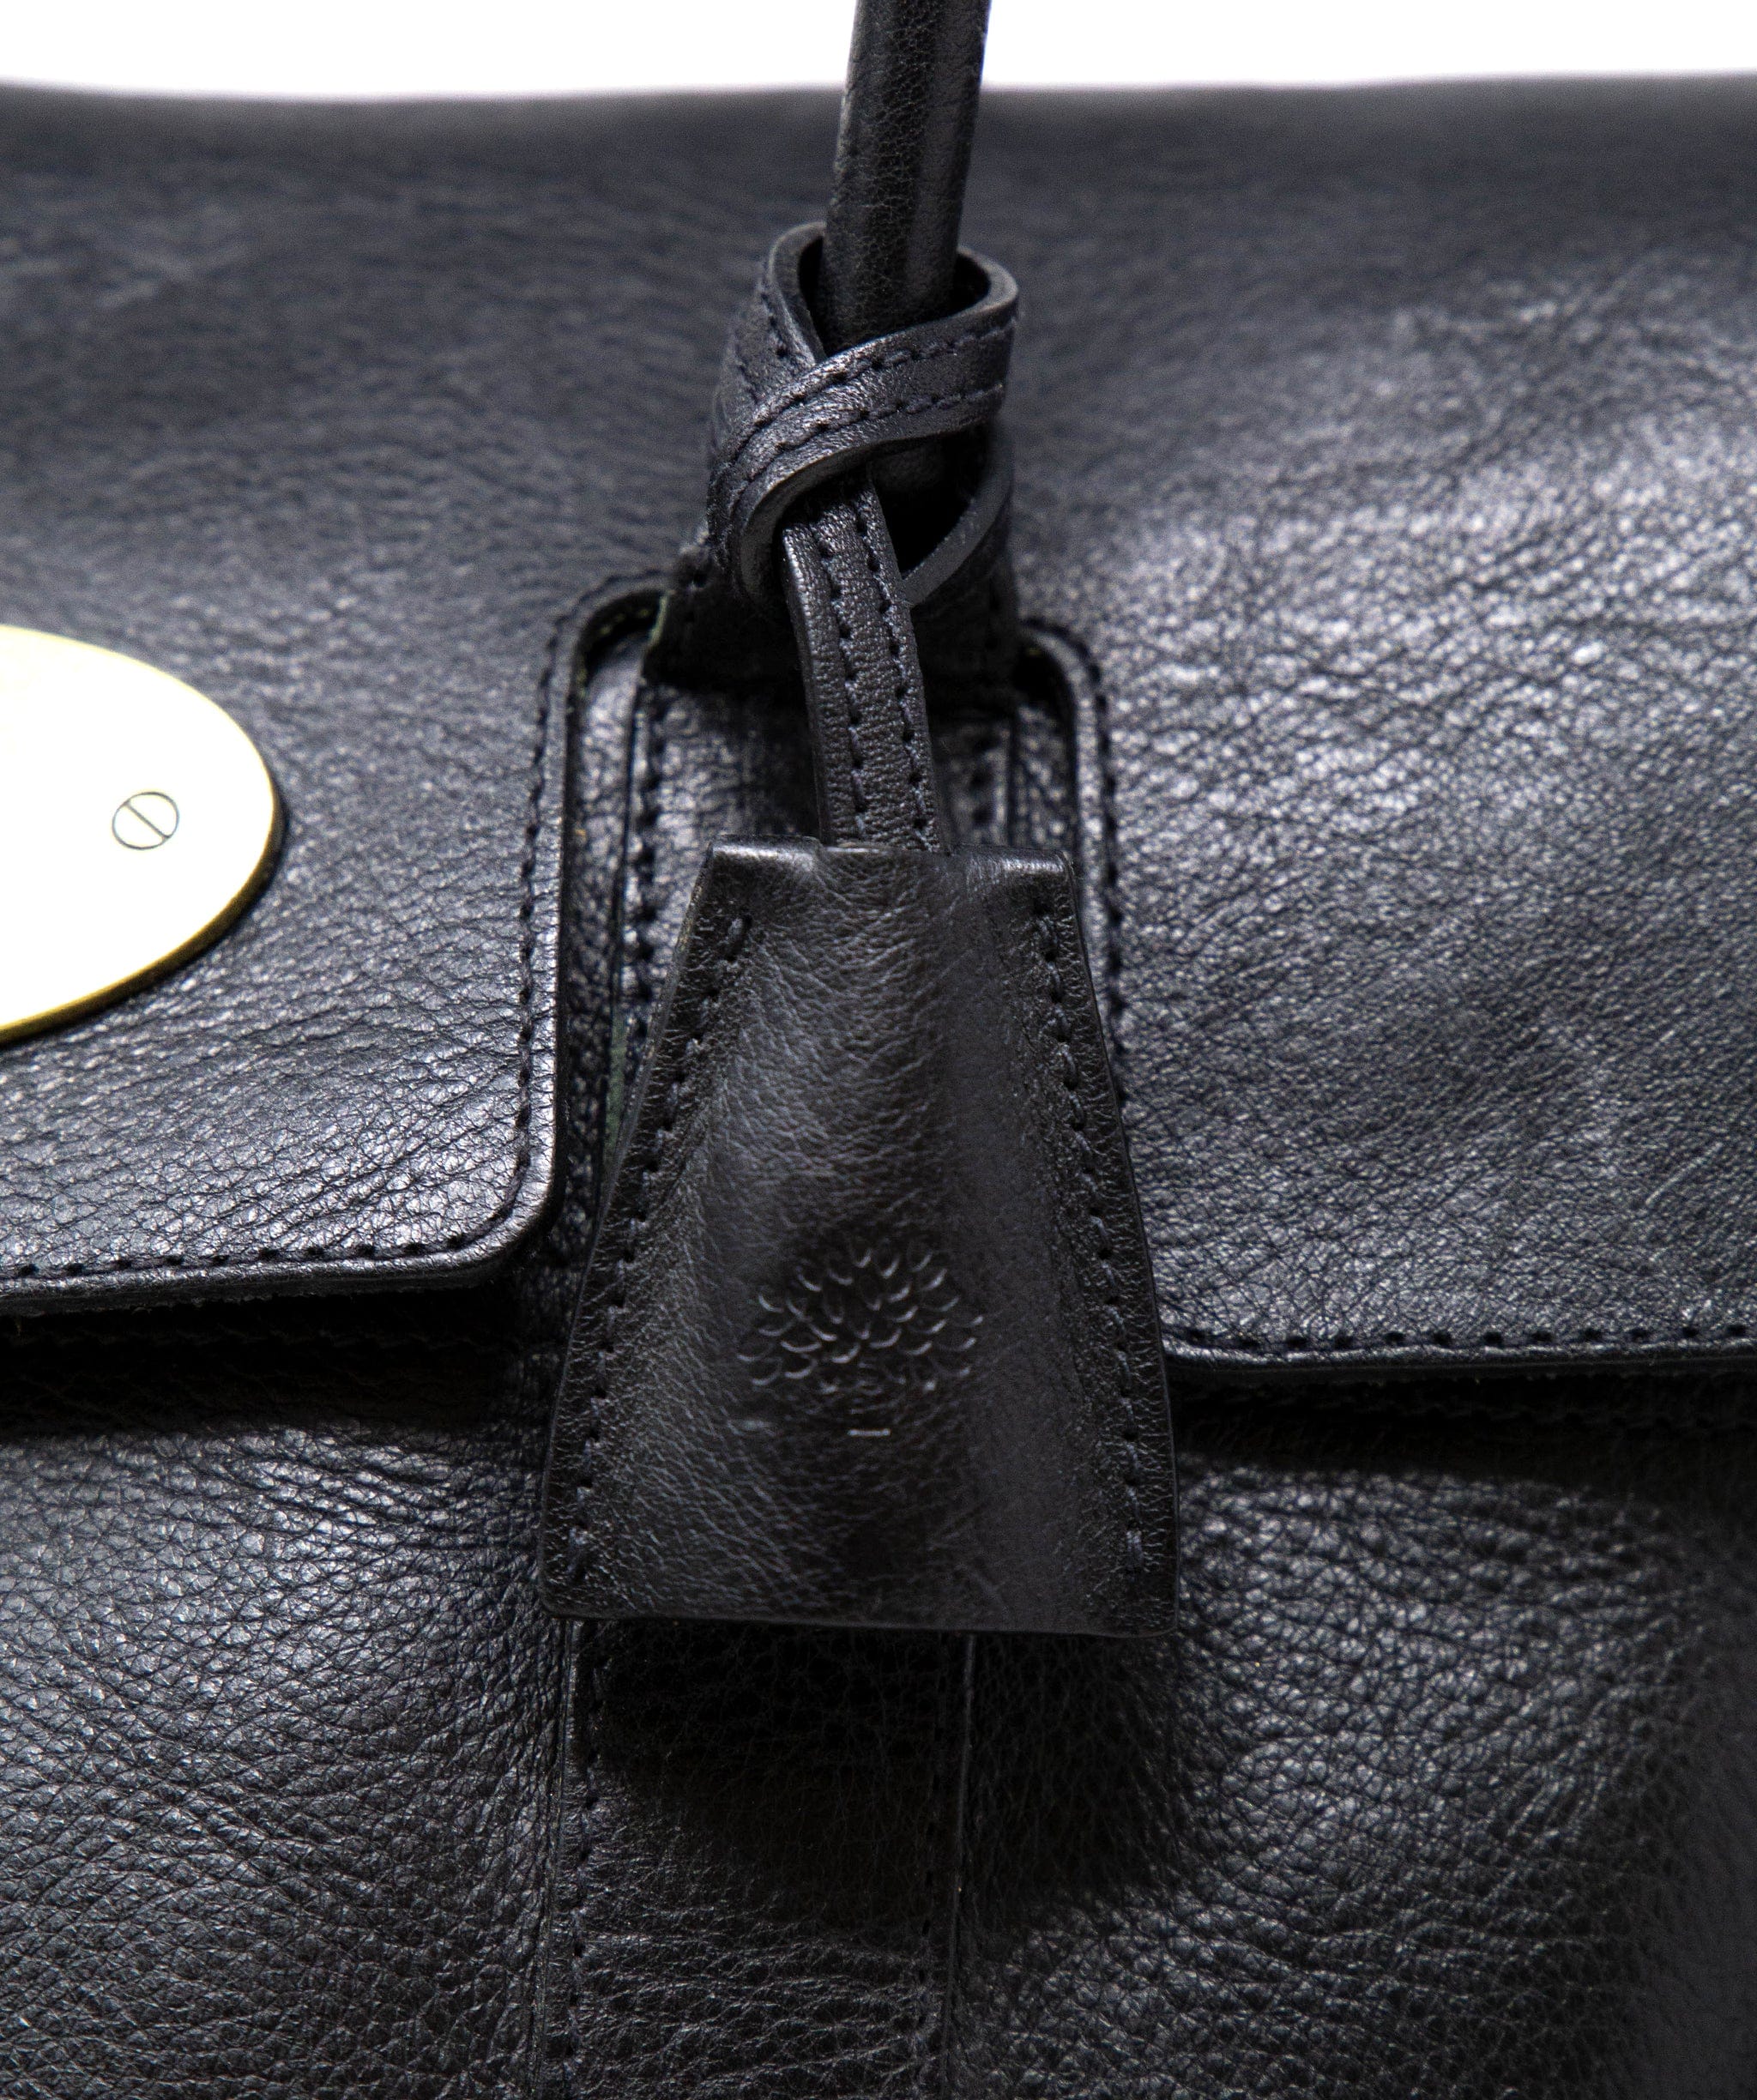 Mulberry Mulberry bayswater bag black - AGL1926